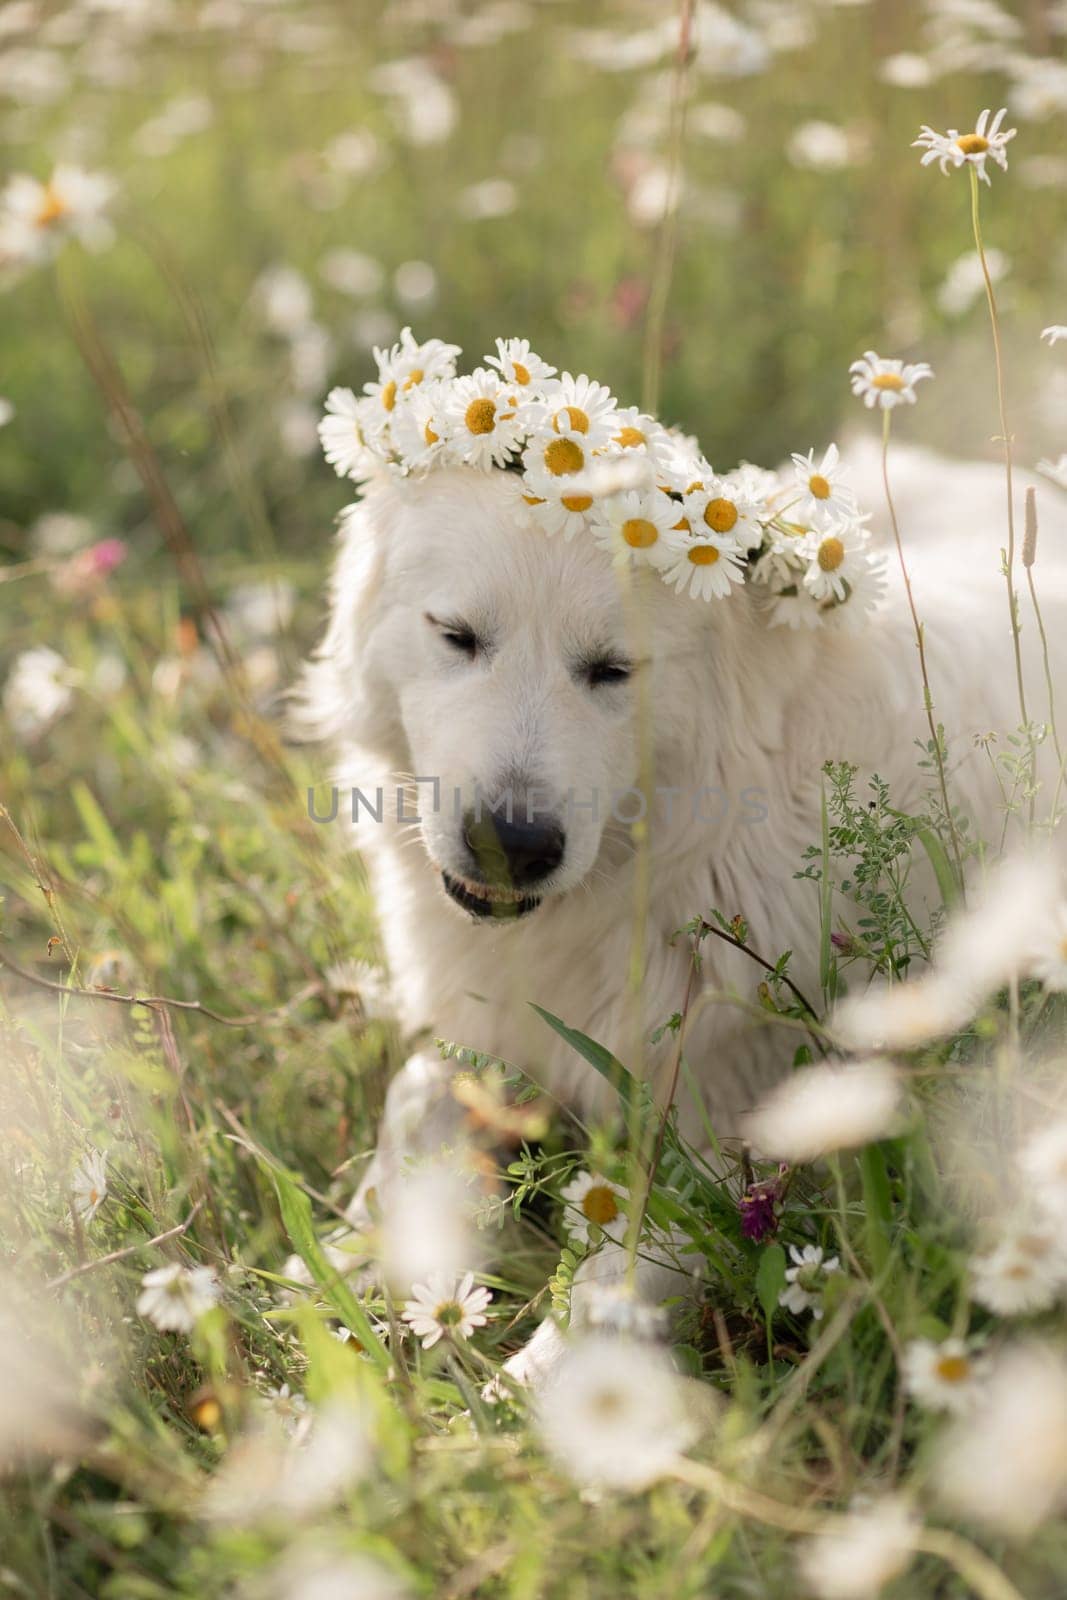 Daisies Maremma Sheepdog in a wreath of daisies sits on a green lawn with wild flowers daisies, walks a pet. Cute photo with a dog in a wreath of daisies. by Matiunina